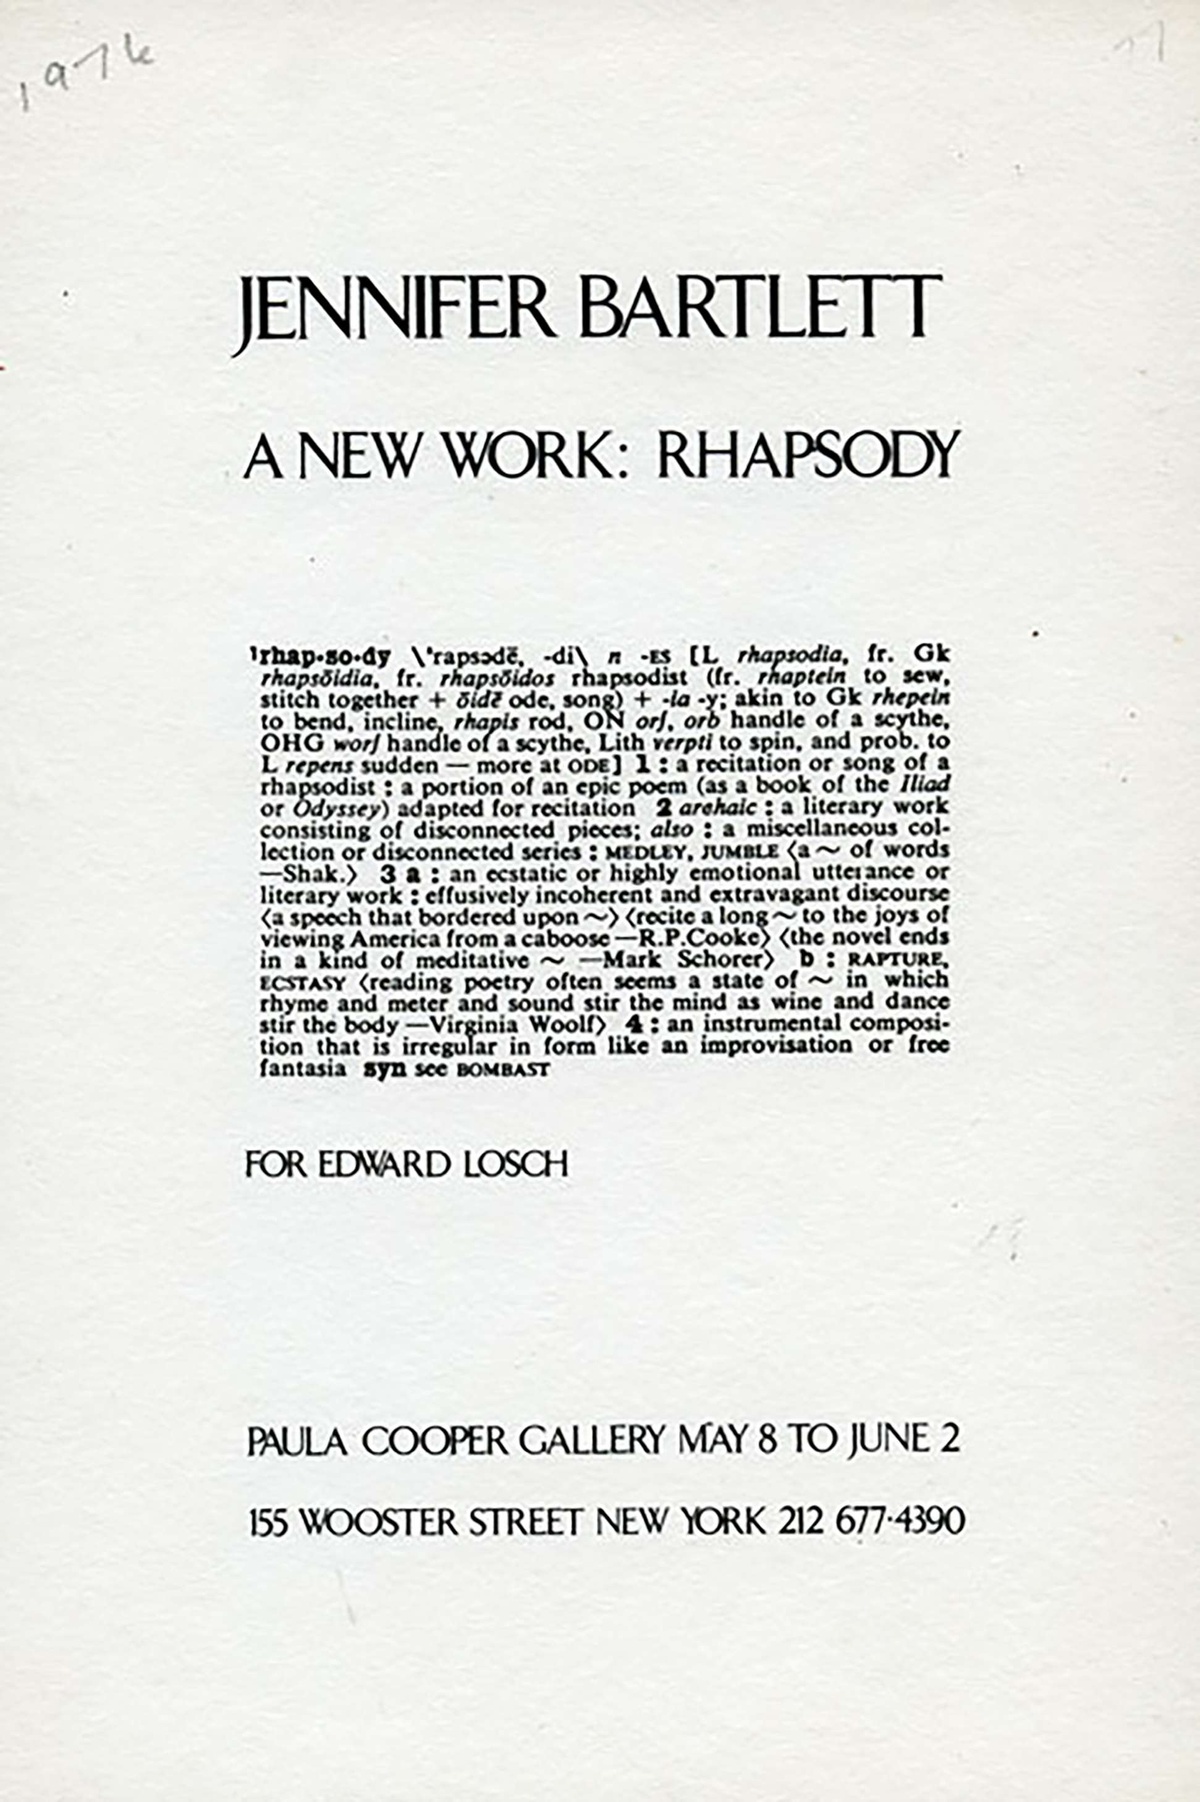 Black and white invitation to Jennifer Bartlett's exhibition "A New Work: Rhapsody" at Paula Cooper Gallery.